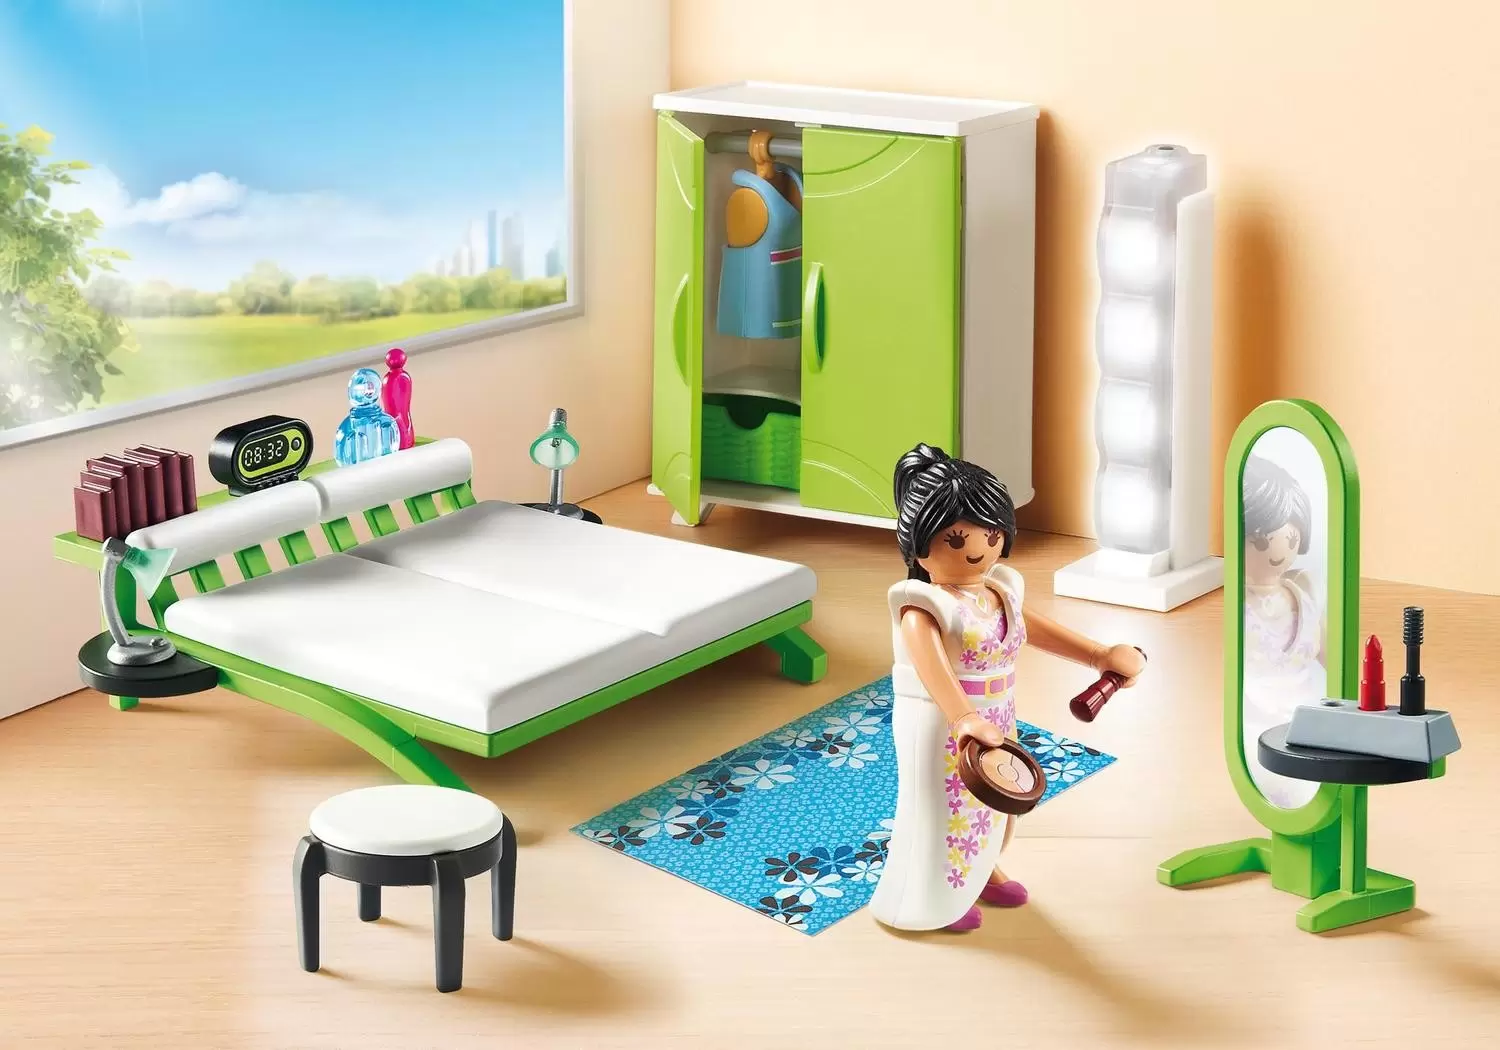 Playmobil Houses and Furniture - Bedroom